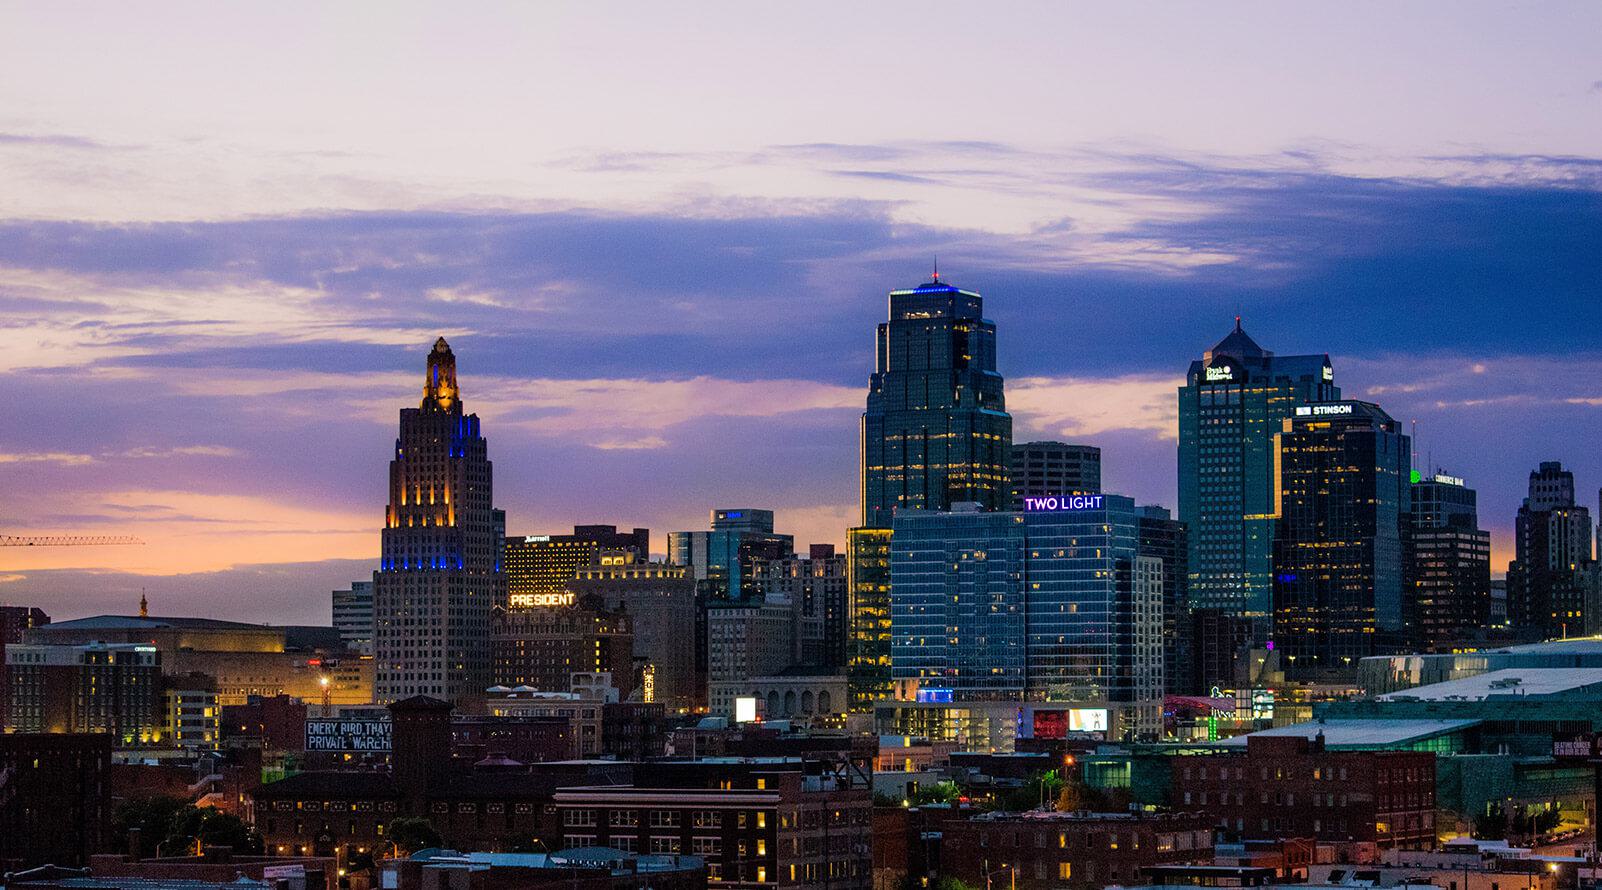 Kansas City skyline at dusk with lights in the building windows